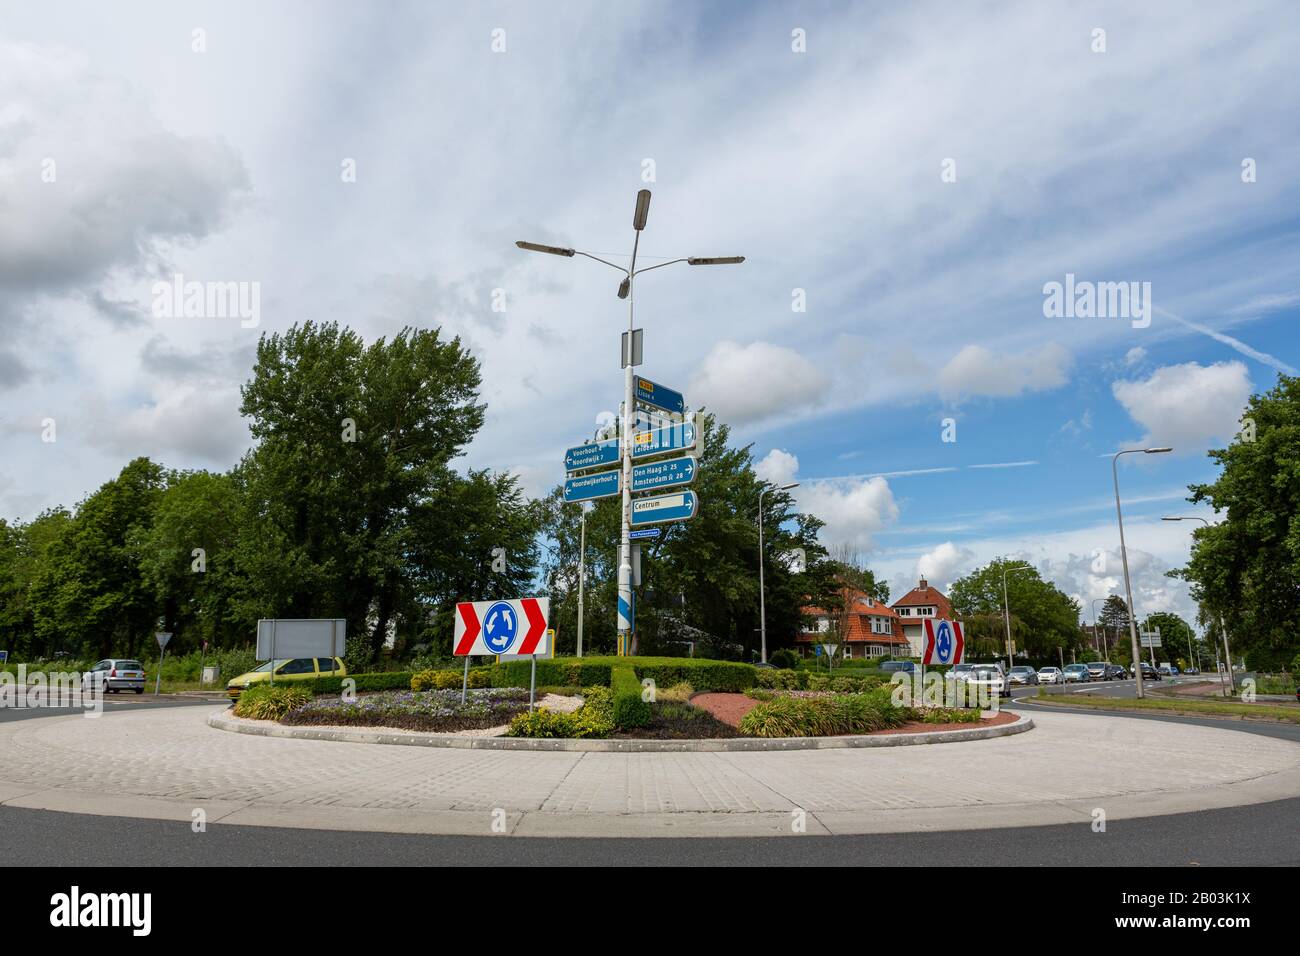 Cars entering a roundabout with traffic direction signs on the van Pallandtlaan in the village of Sassenheim in the Netherlands. Stock Photo